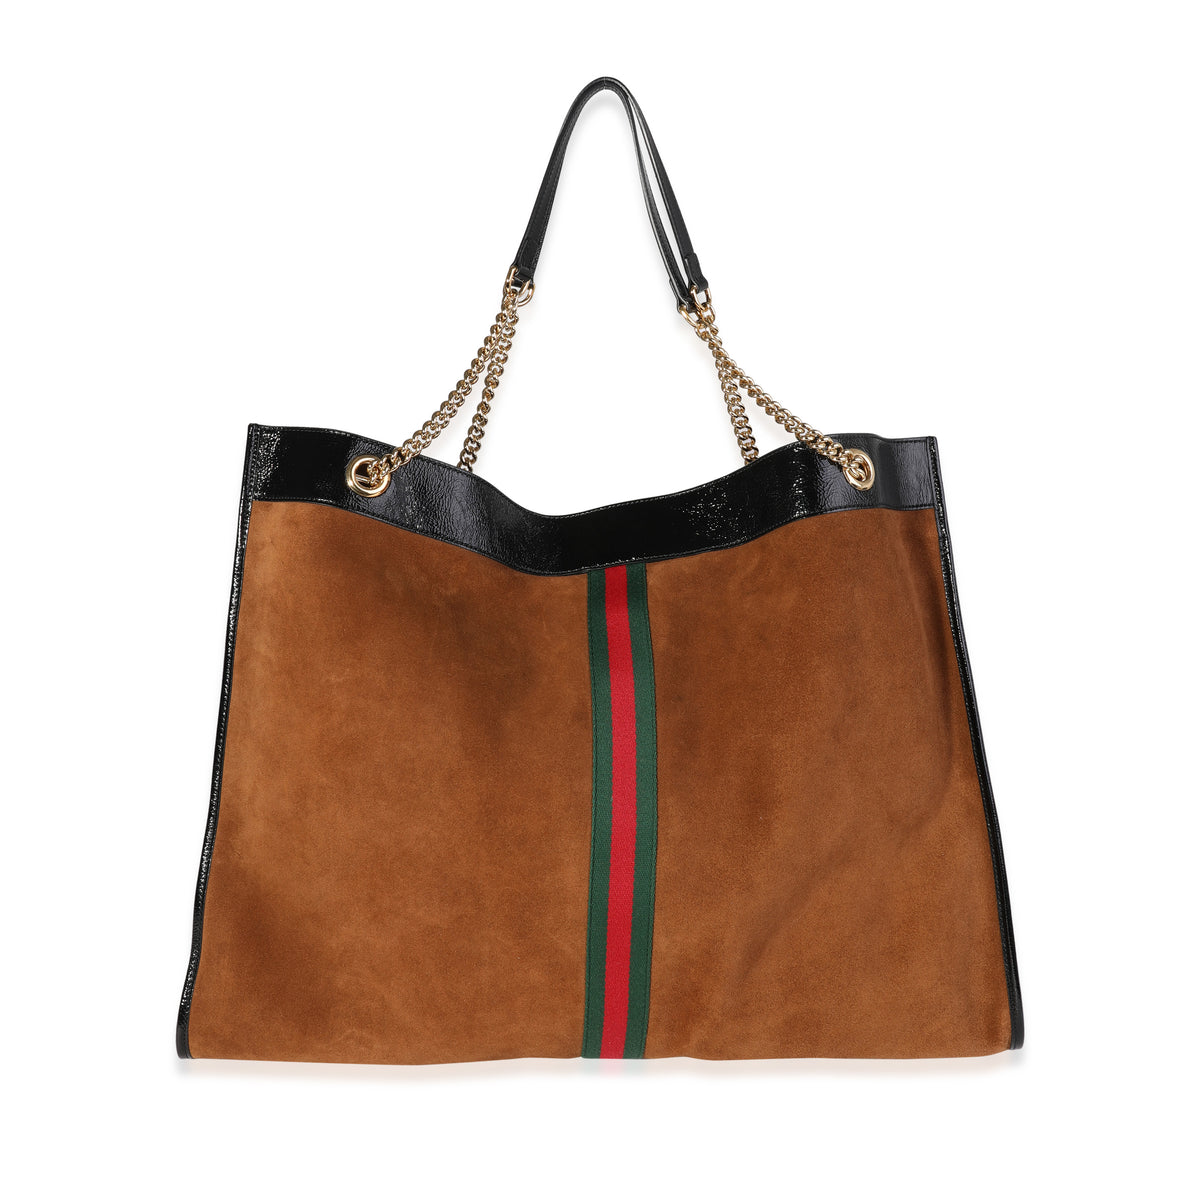 Gucci Brown Suede & Black Patent Leather Maxi Rajah Chain Tote